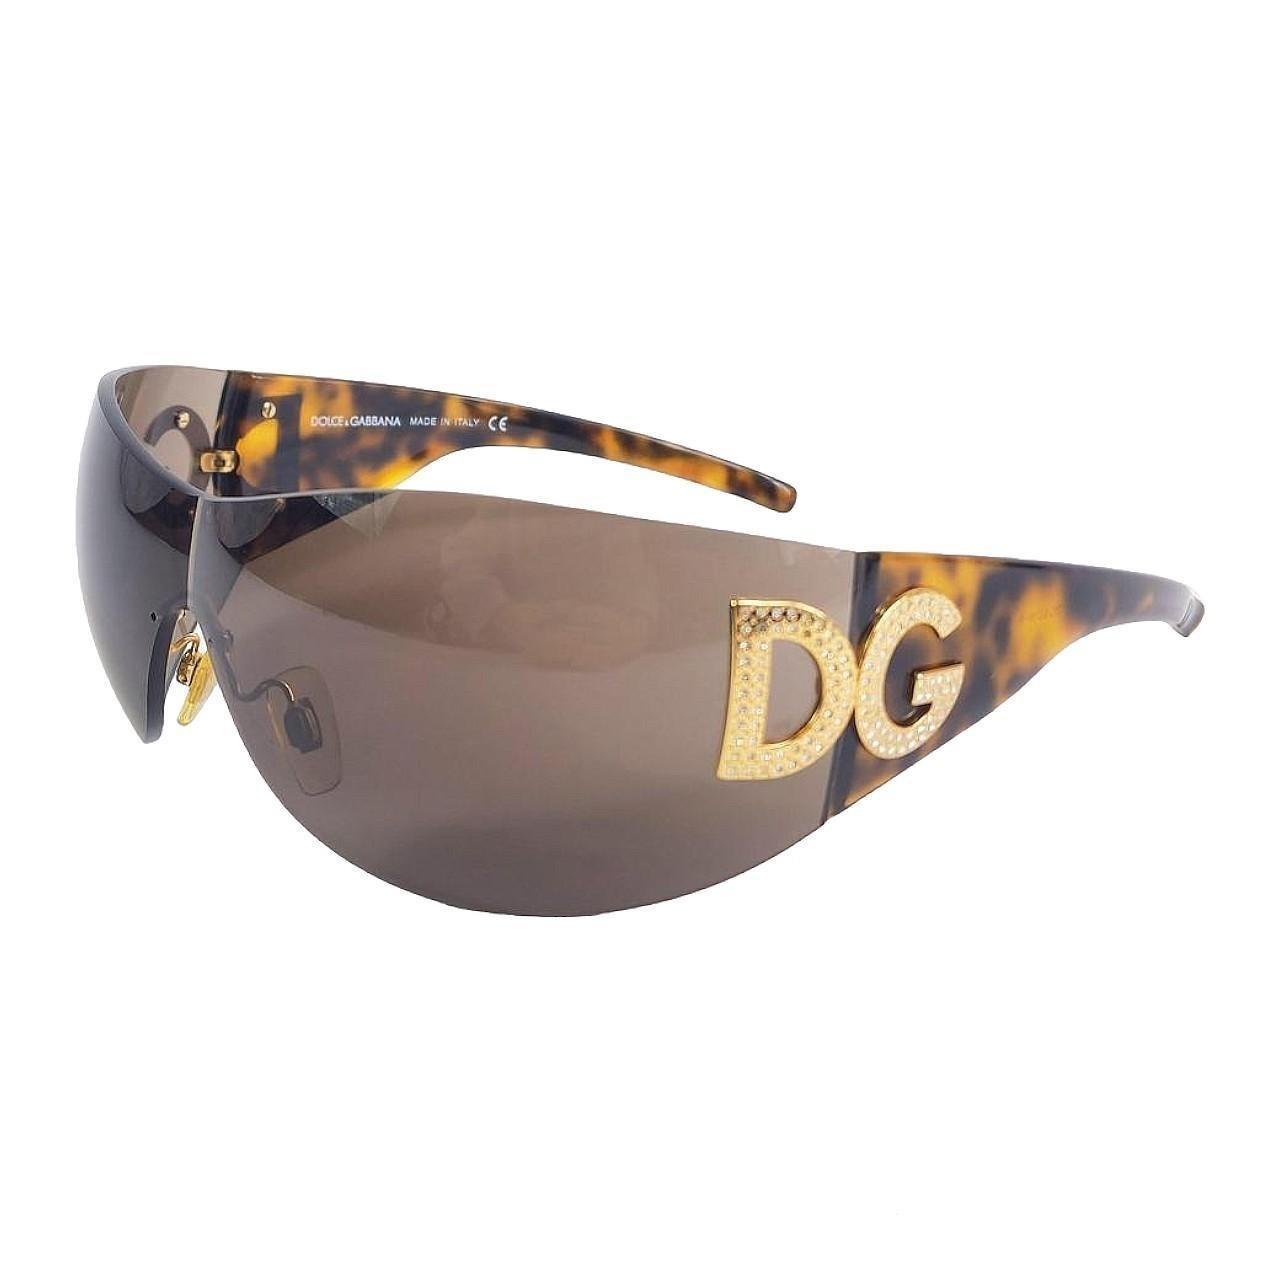 Dolce & Gabbana Men's Brown and Gold Sunglasses - 1